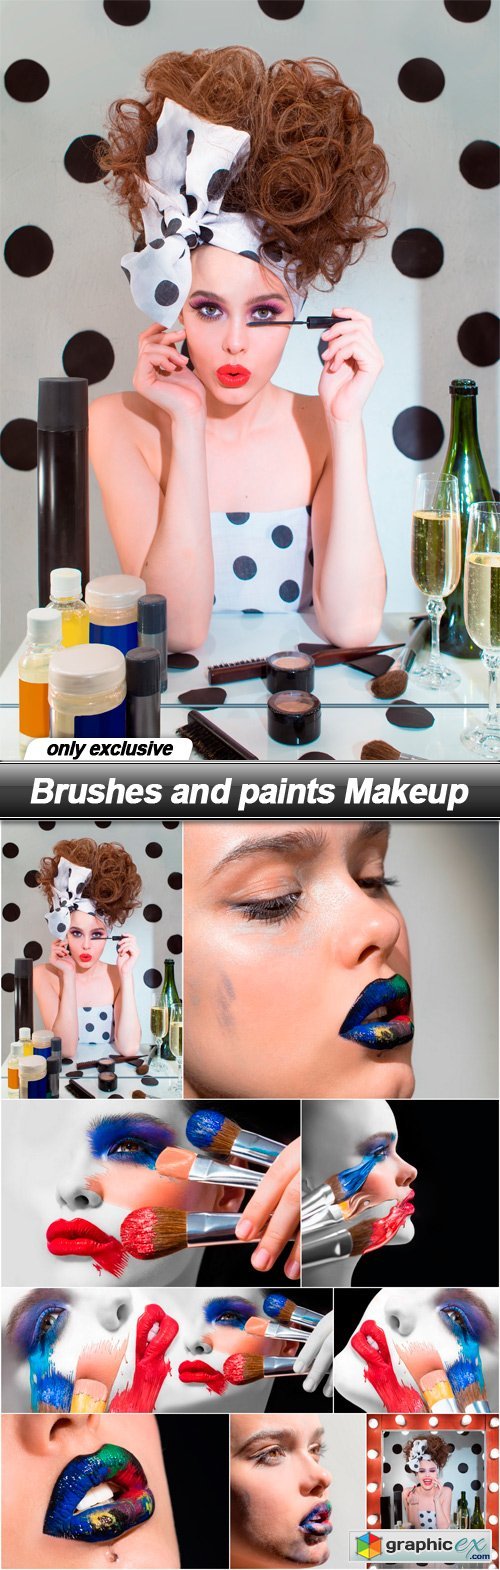 Brushes and paints Makeup - 9 UHQ JPEG